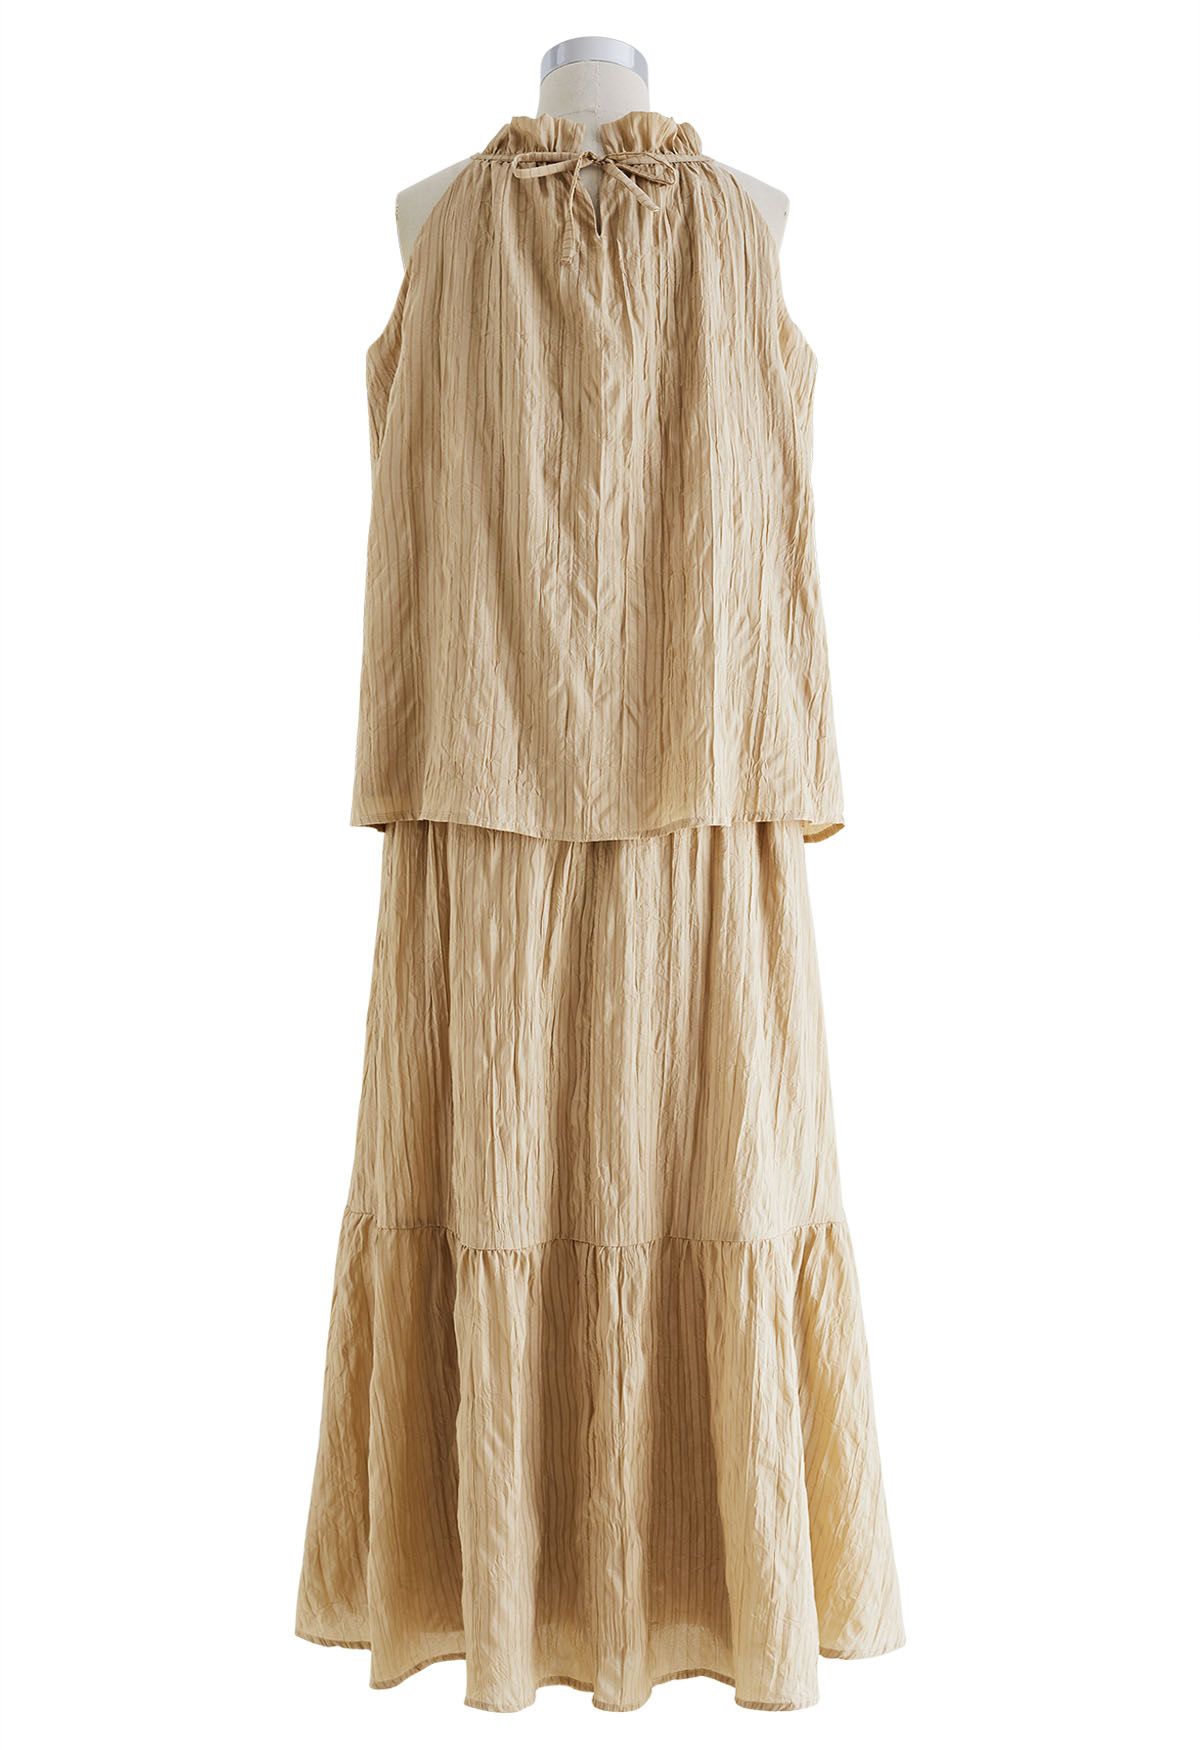 Striped Halter Top and Frilling Maxi Skirt Set in Light Tan